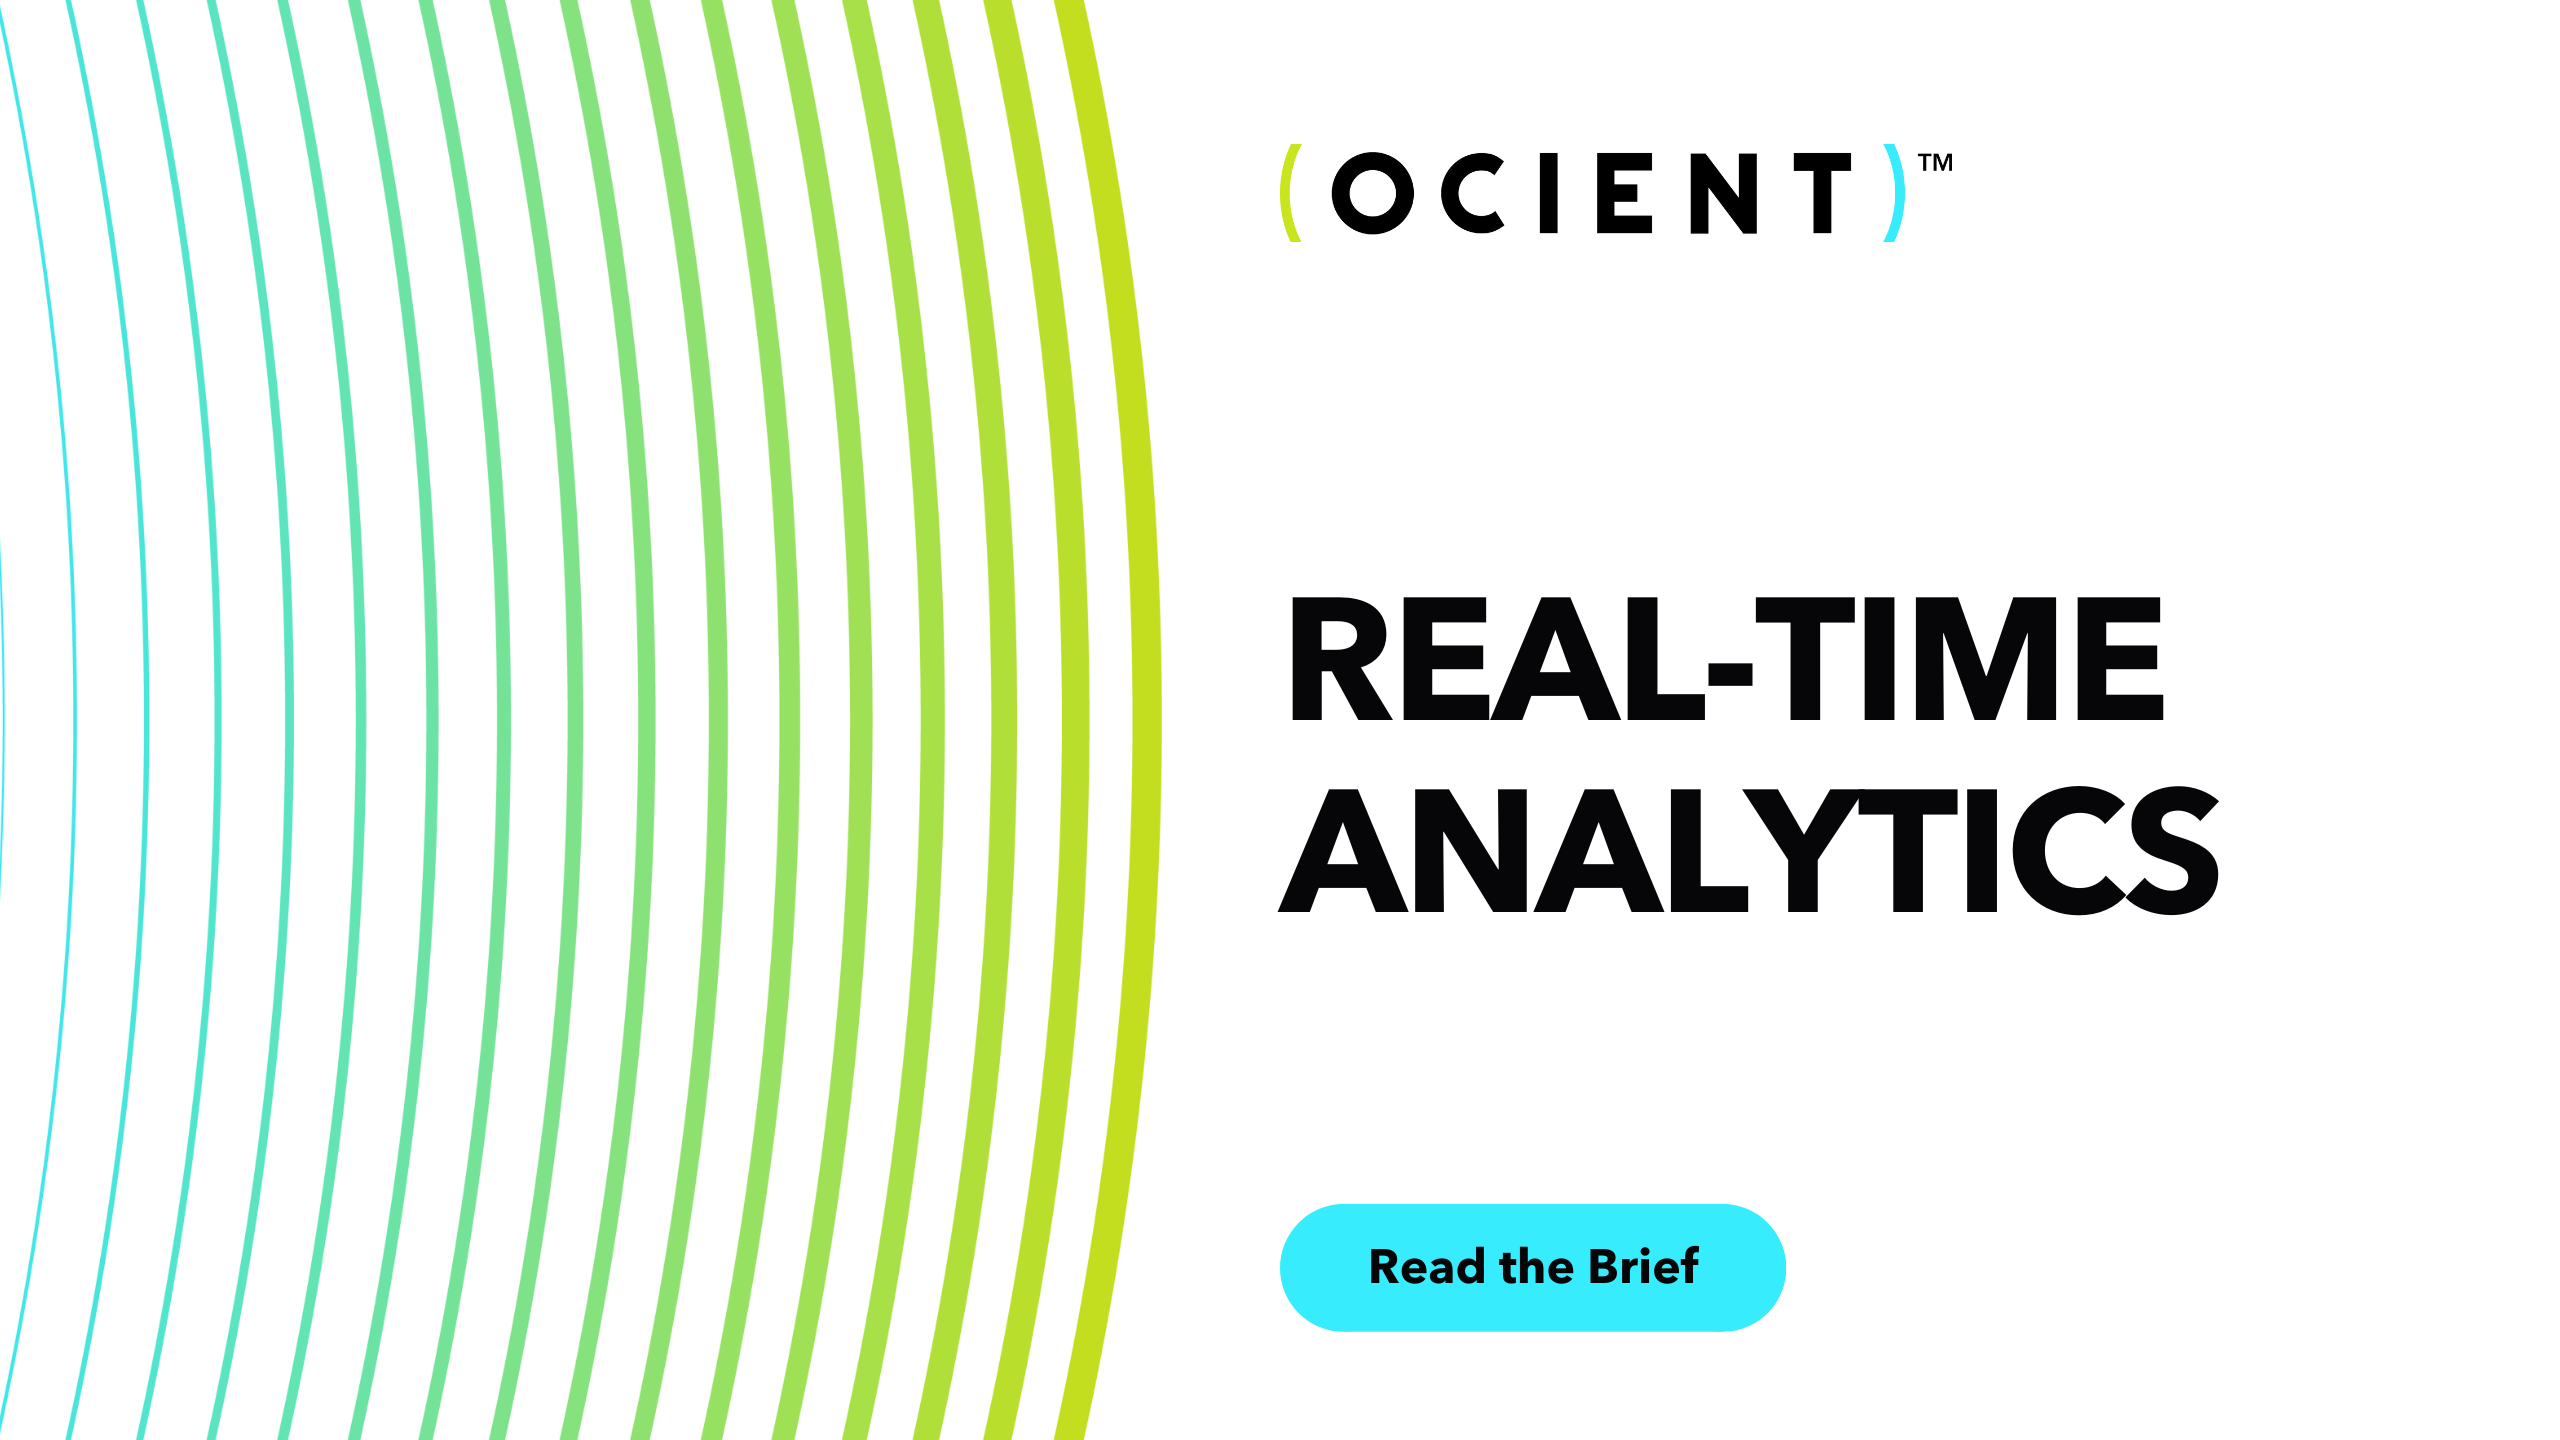 Real time Analytics | Ocient™